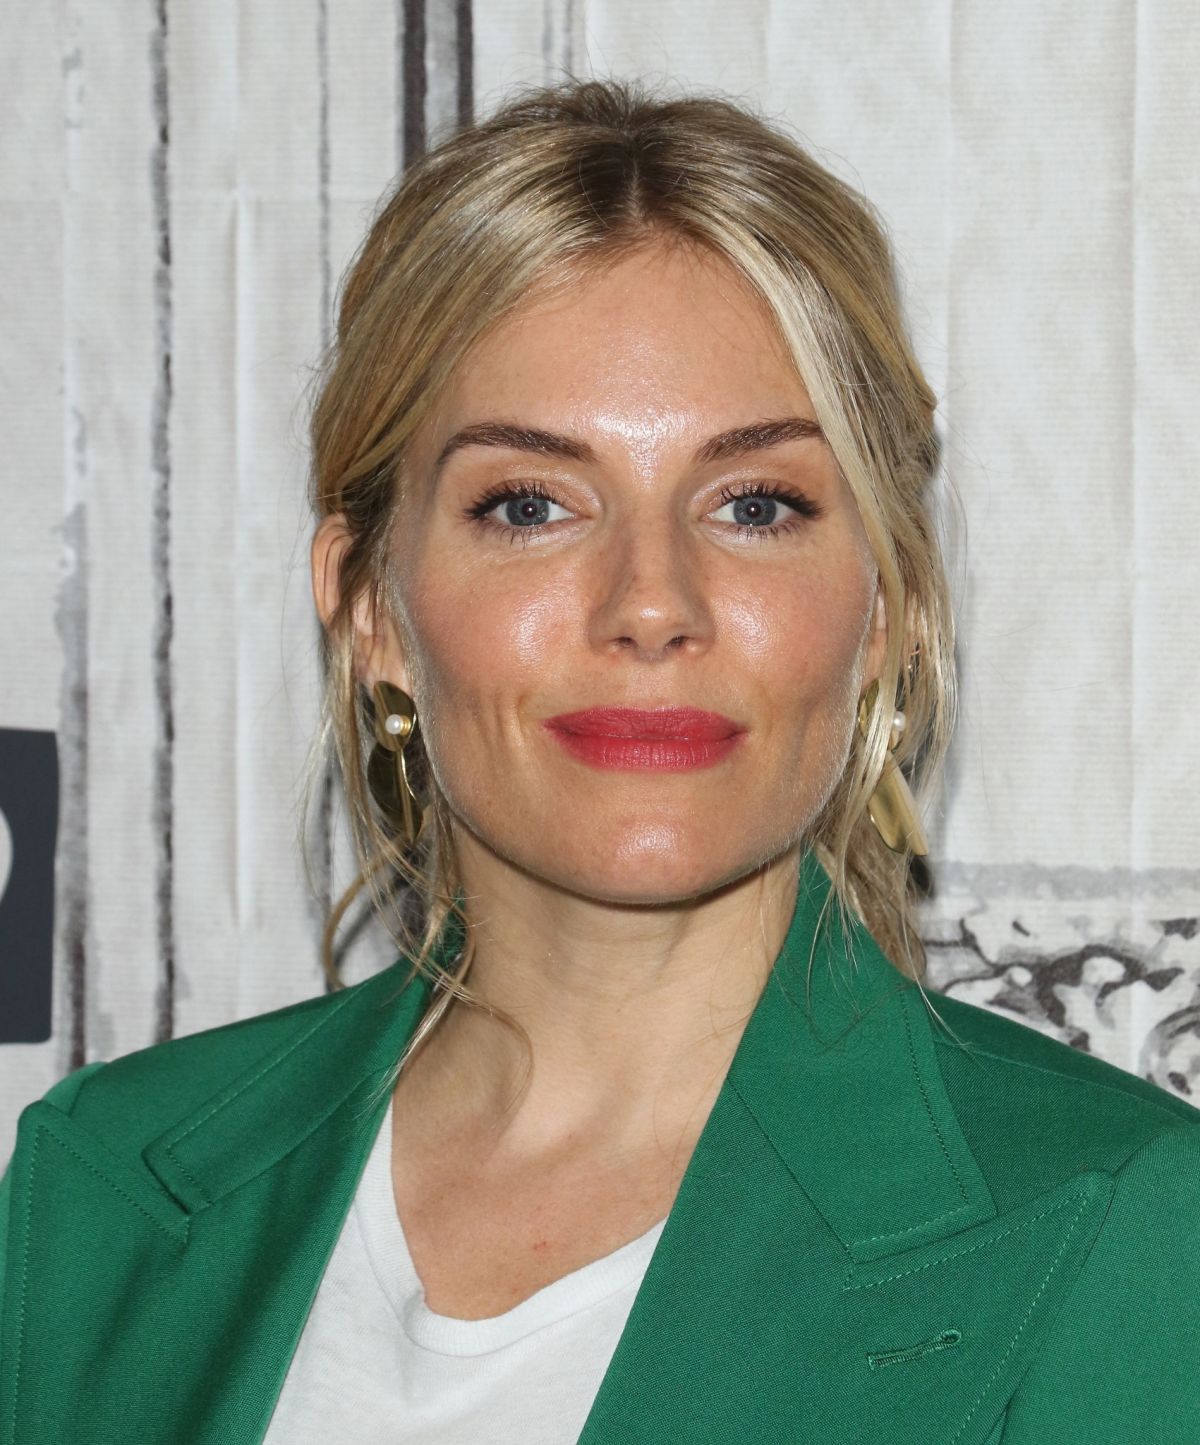 List 99+ Images recent pictures of sienna miller Stunning